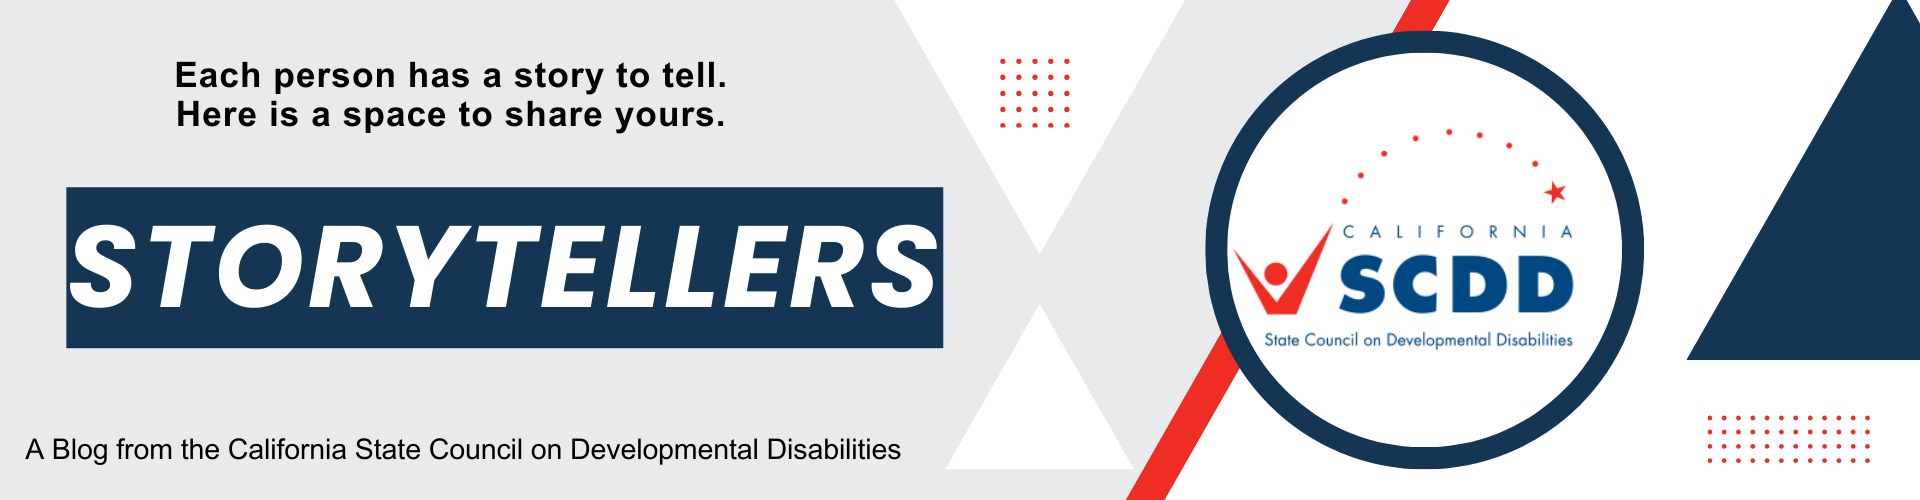 Banner that reads: Each person has a story to tell. Here is a space to share yours. STORYTELLERS A Blog from the California State Council on Developmental Disabilities. With an image of the SCDD Logo.